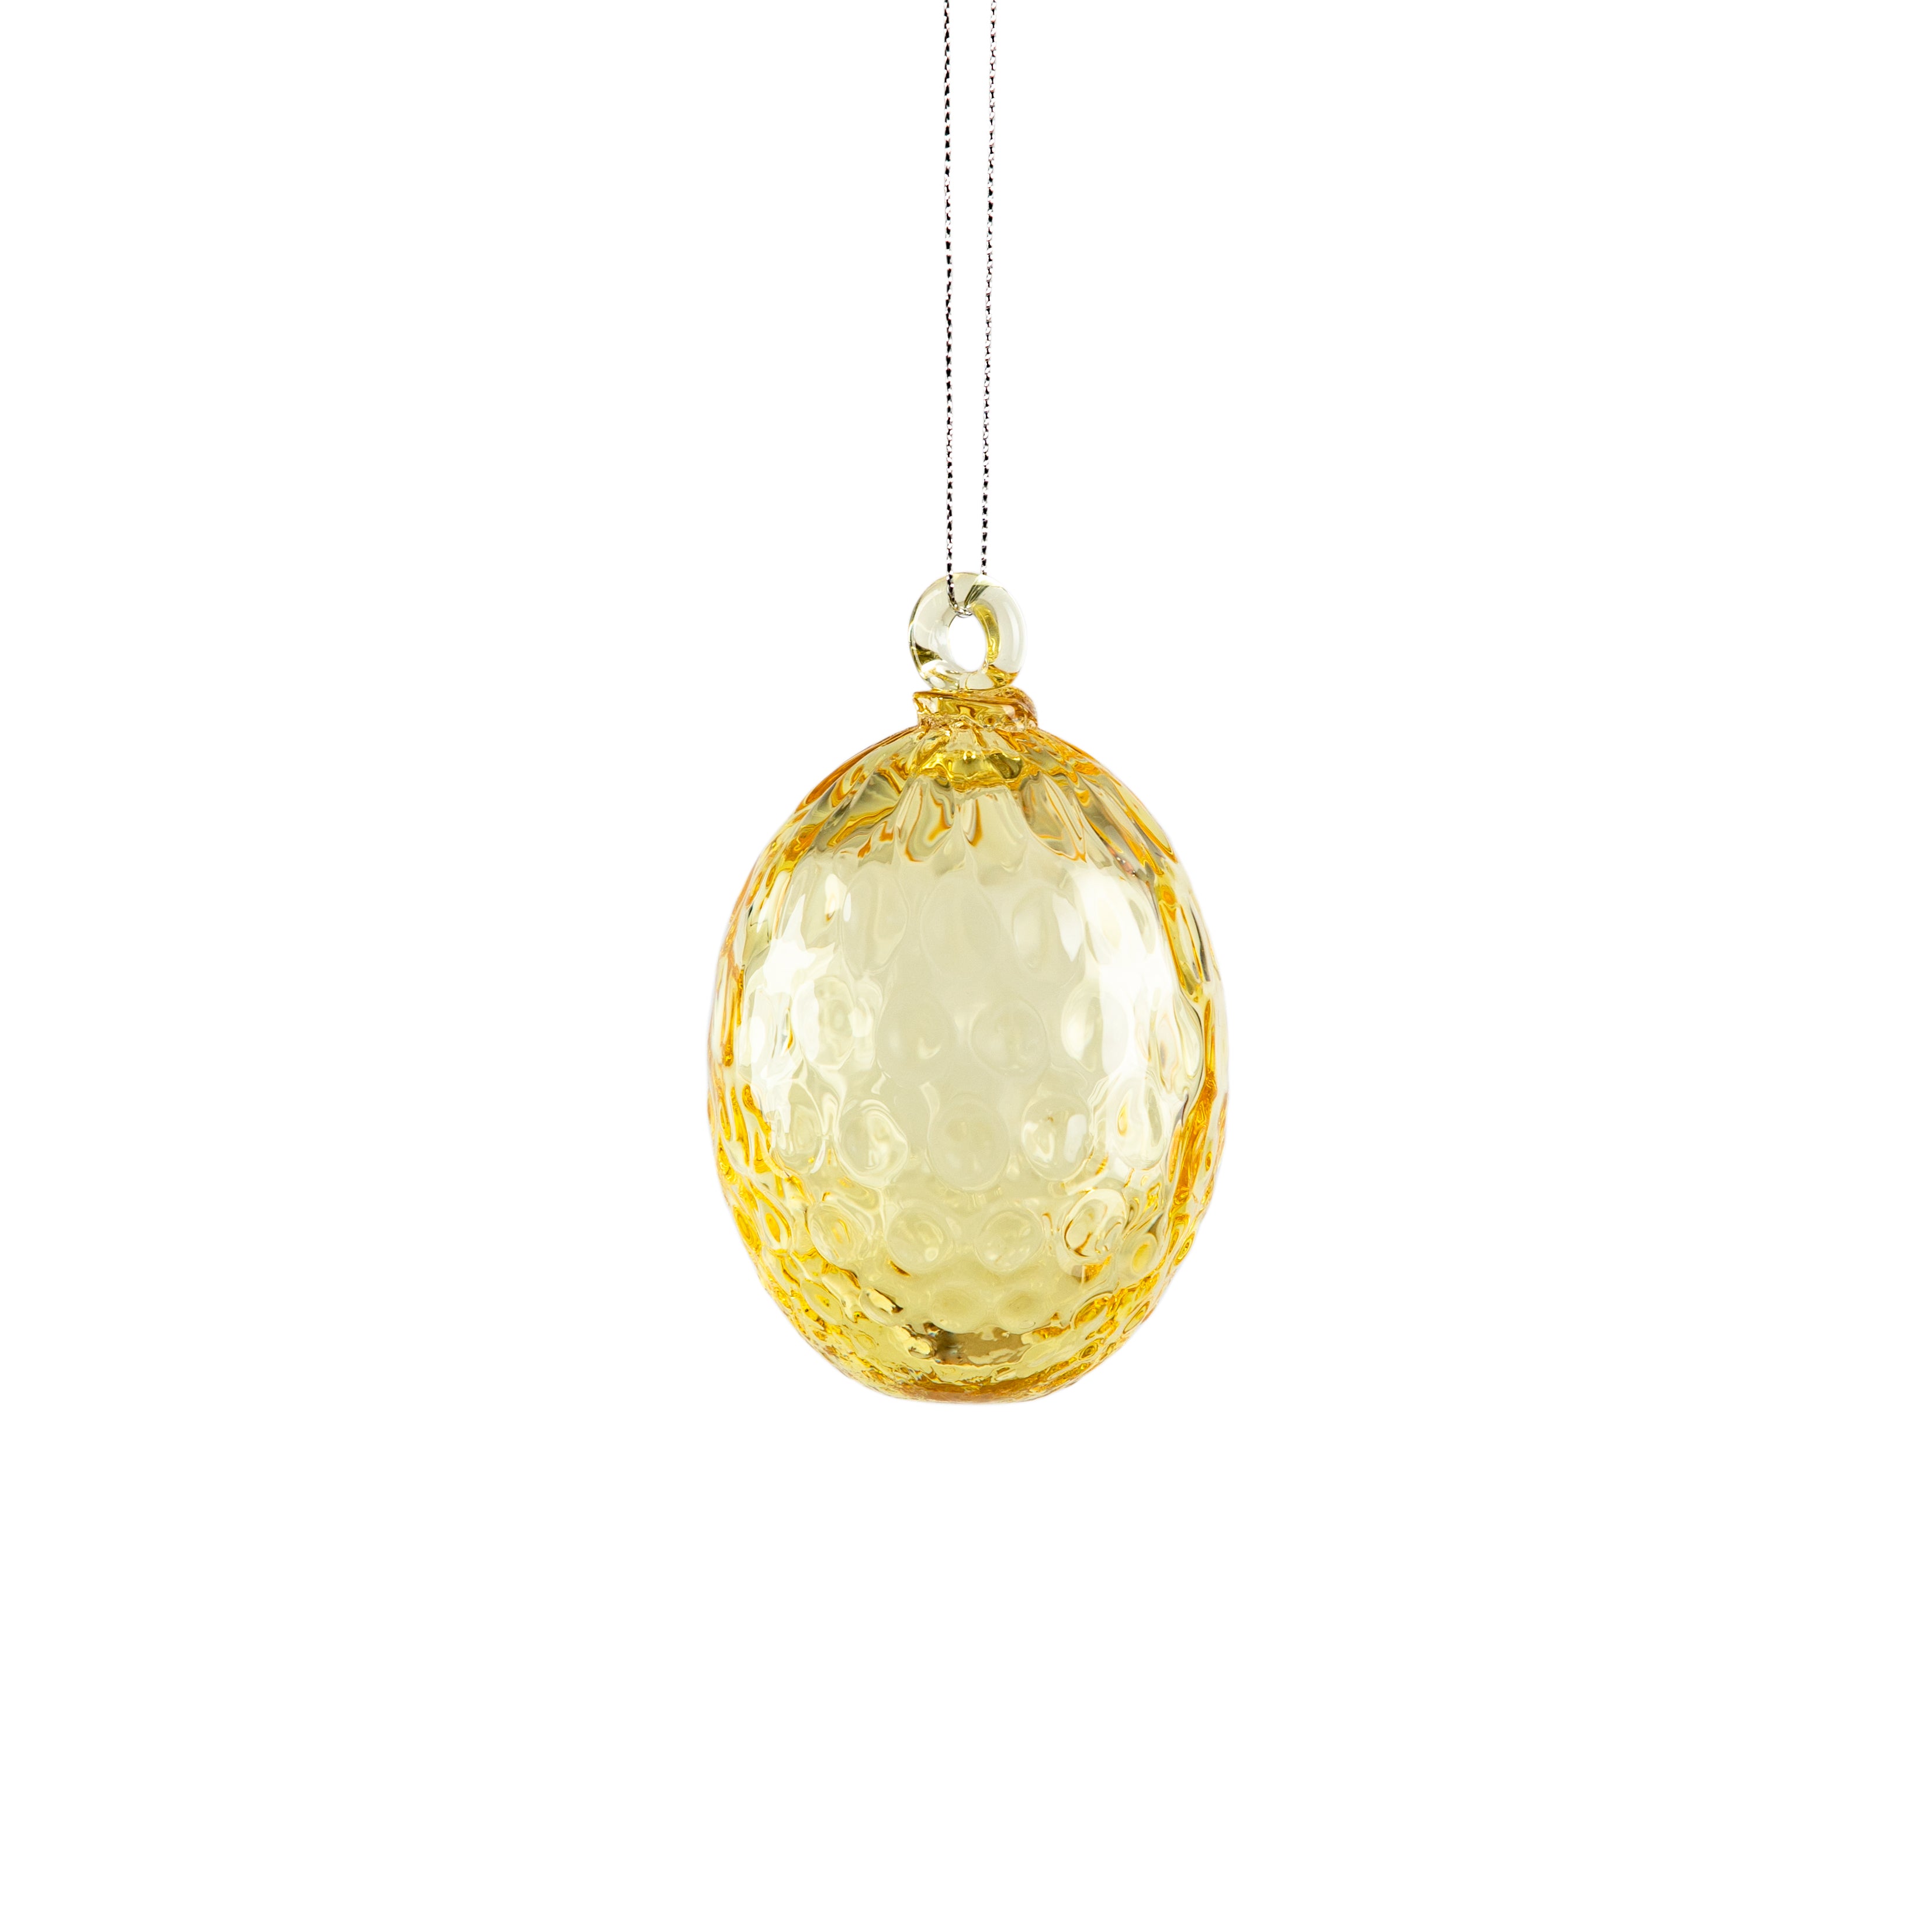 Yellow glass easter egg decoration